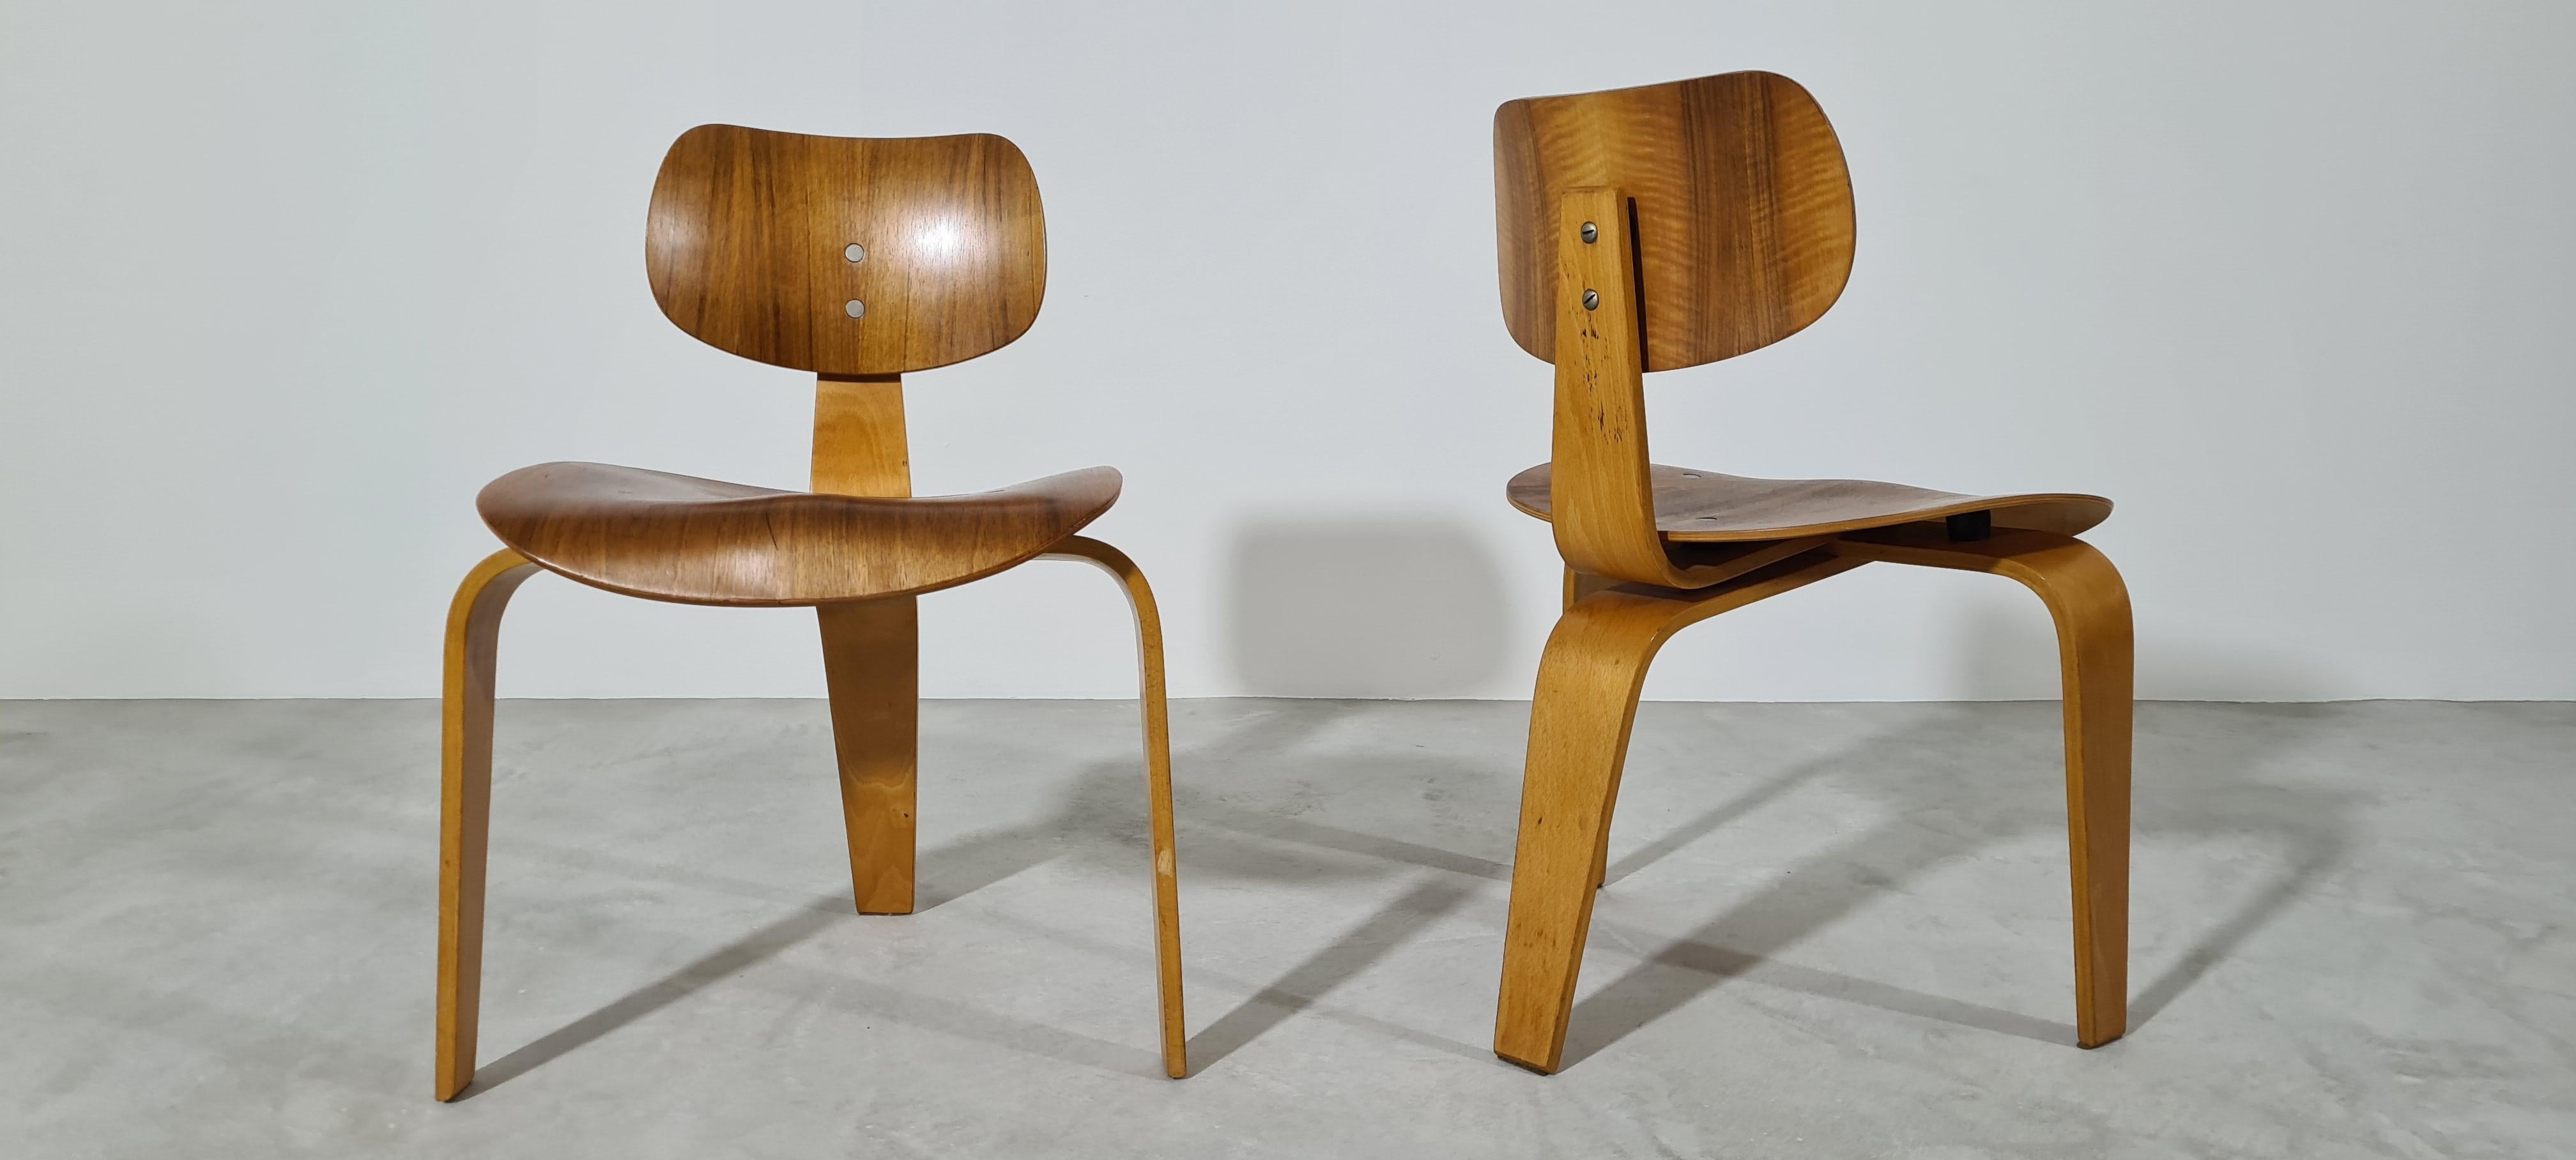 German Pair of Egon Eiermann Chairs Se 42/Se 3 produced by Wilde & Spieth in 1950 For Sale